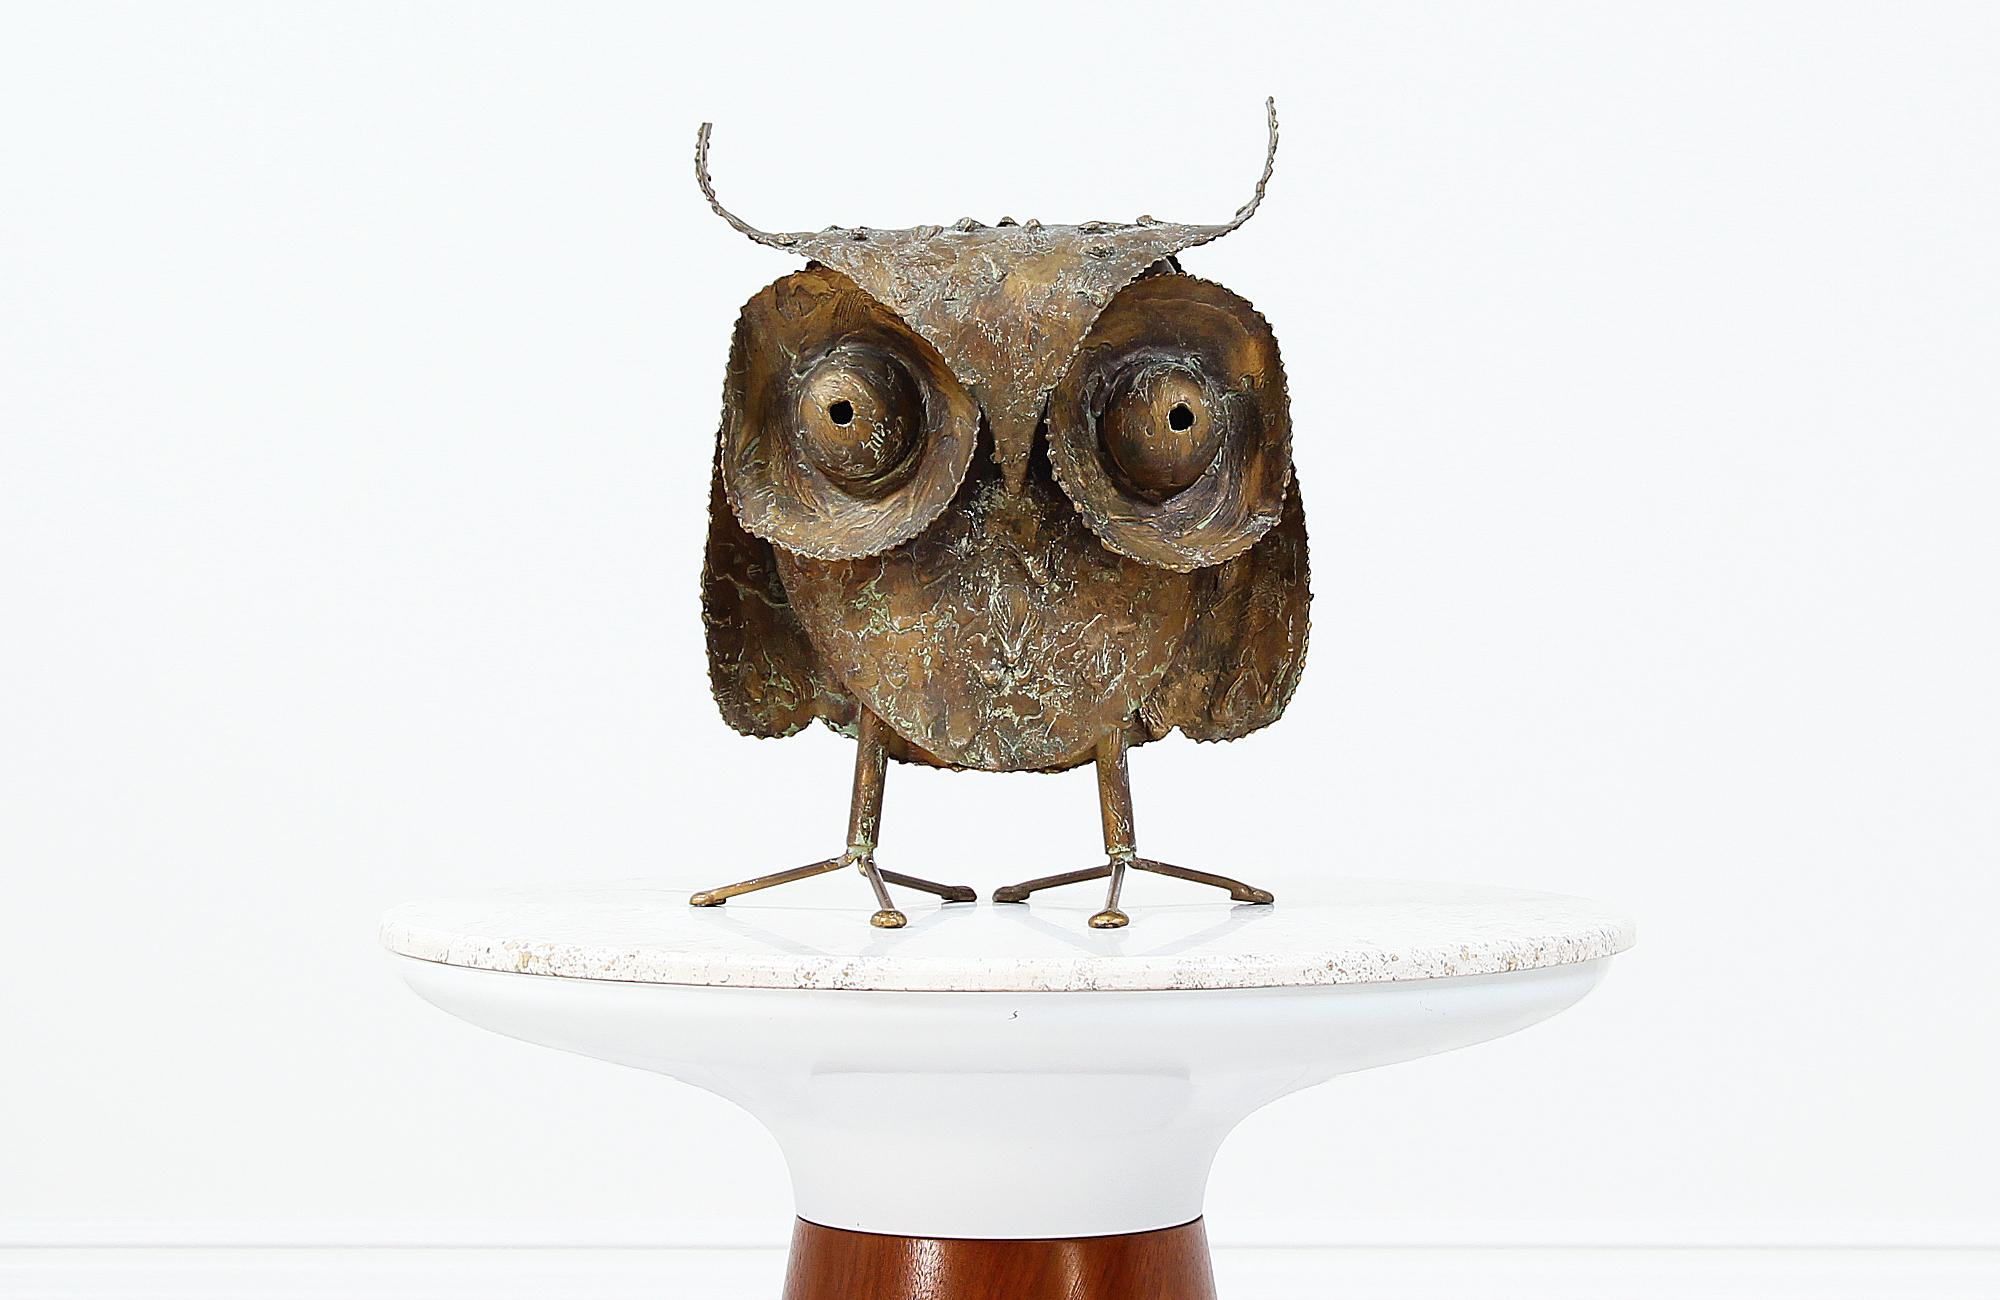 Vintage Brutalist metal owl sculpture designed by Curtis Jere for Artisan House in the United States signed 1969. This modernist sculpture is made of Brutalist drip finished on metal that shows a beautiful patina from age. Overall this stylish